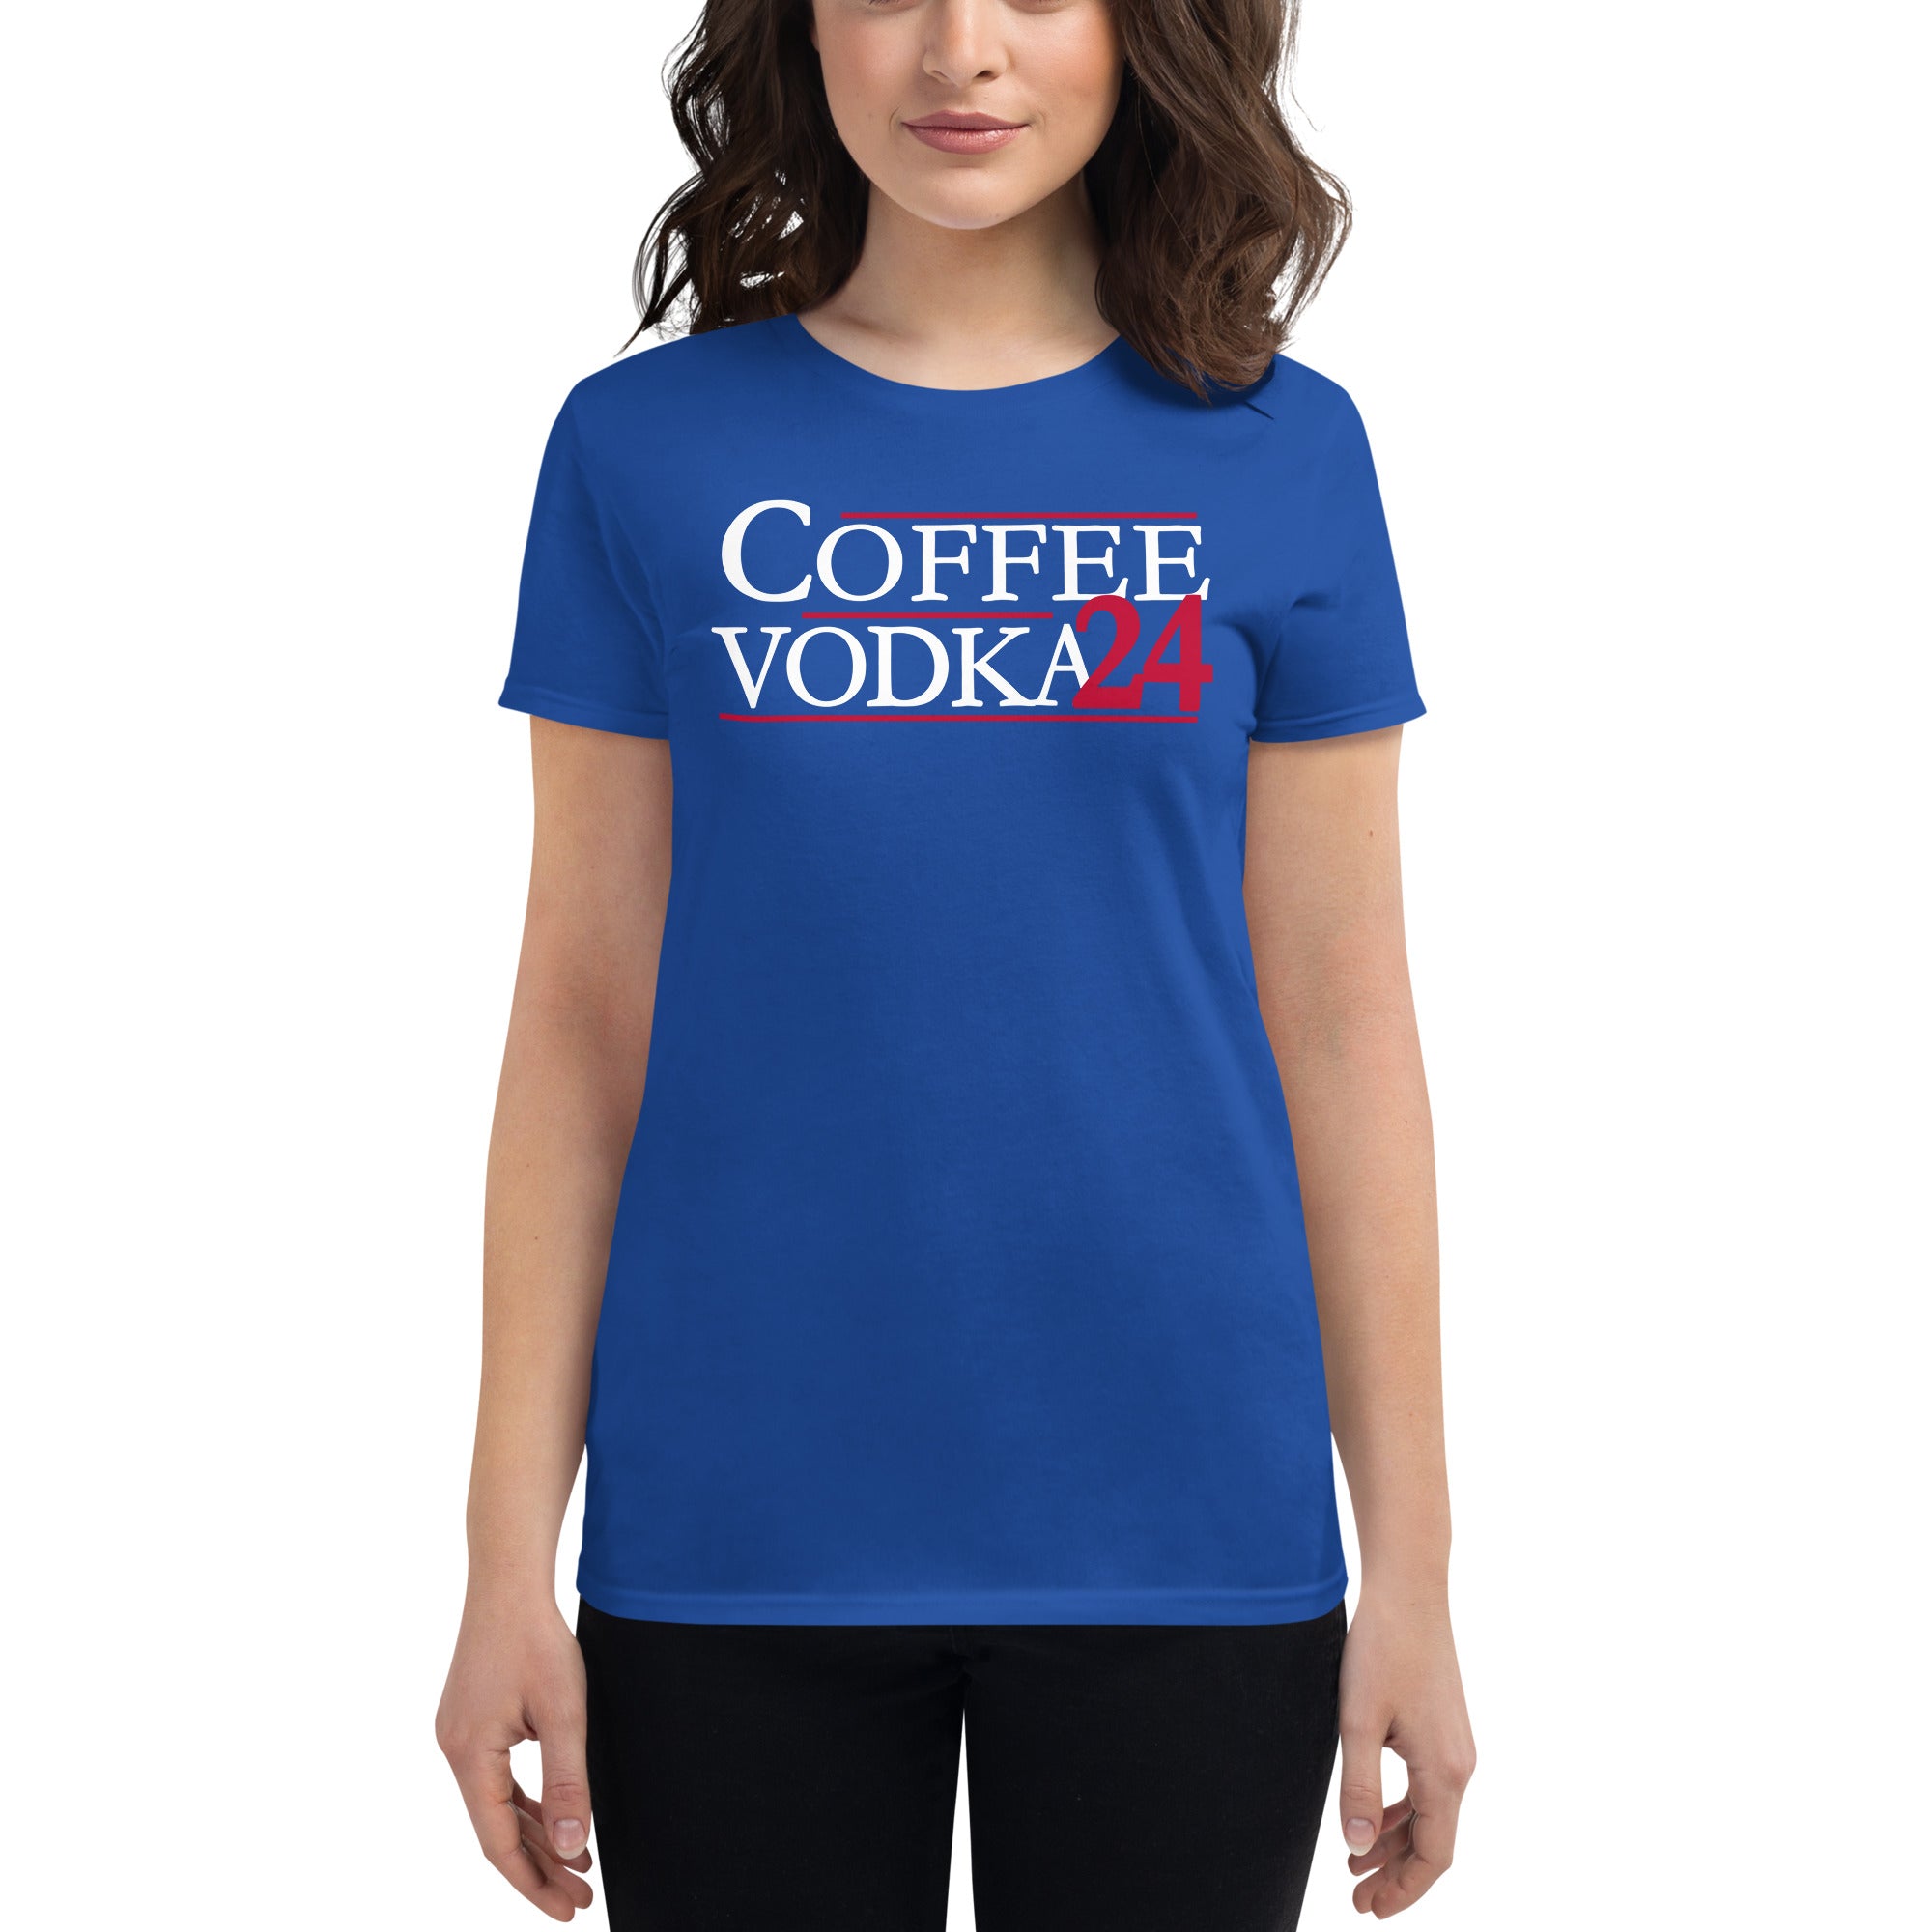 Election Style Women's Tee (2-Lines)